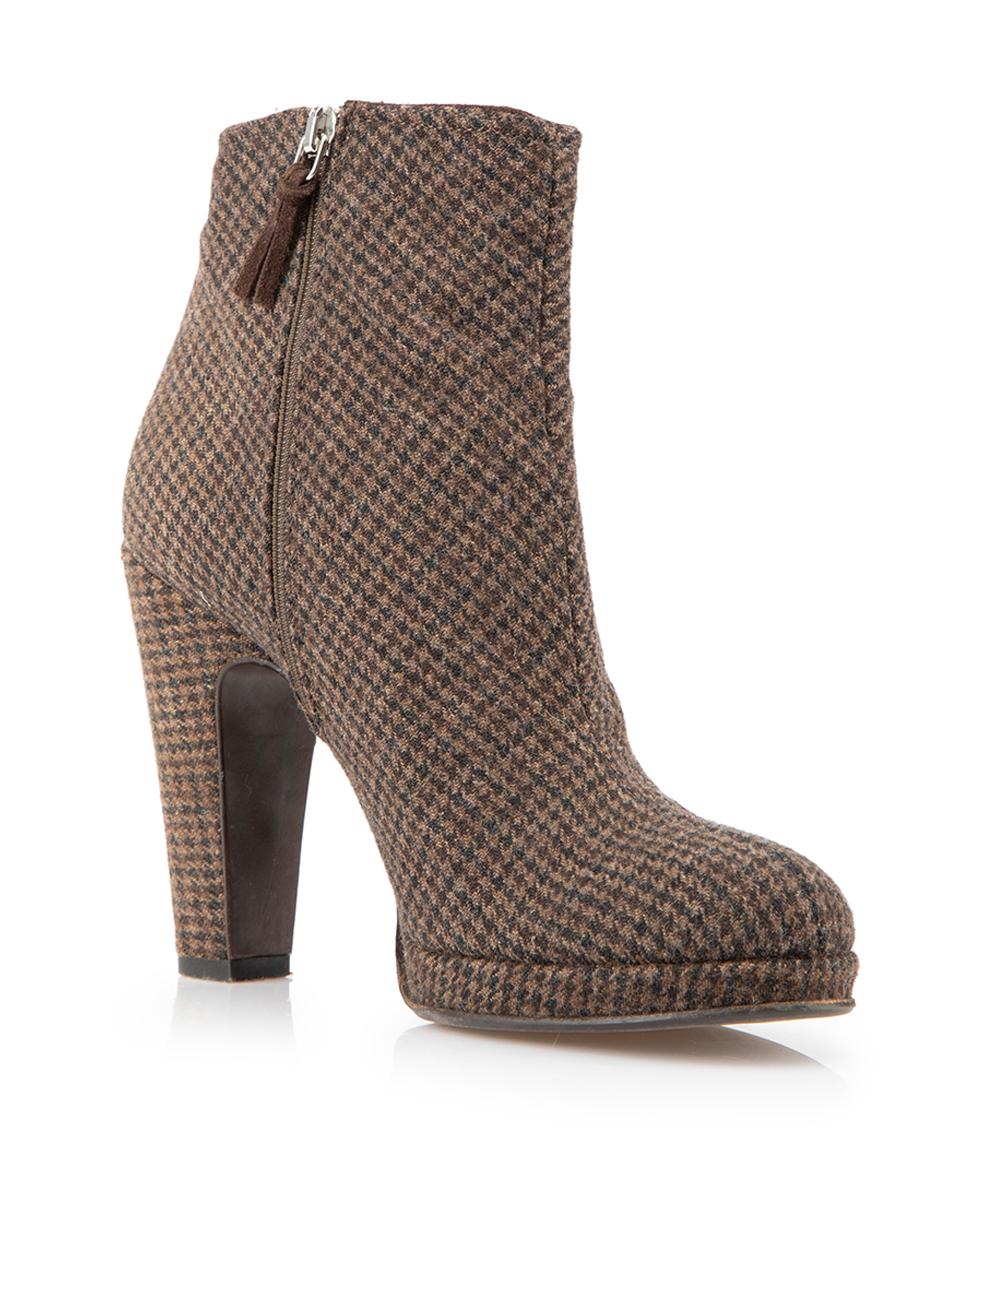 CONDITION is Very good. Minimal wear to boots is evident. Minimal wear to the heel tip and exterior tweed fabric on this used Miu Miu designer resale item. 
 
 Details
  Brown
 Tweed
 Ankle boots
 Houndstooth pattern
 Round toe
 High block heel
